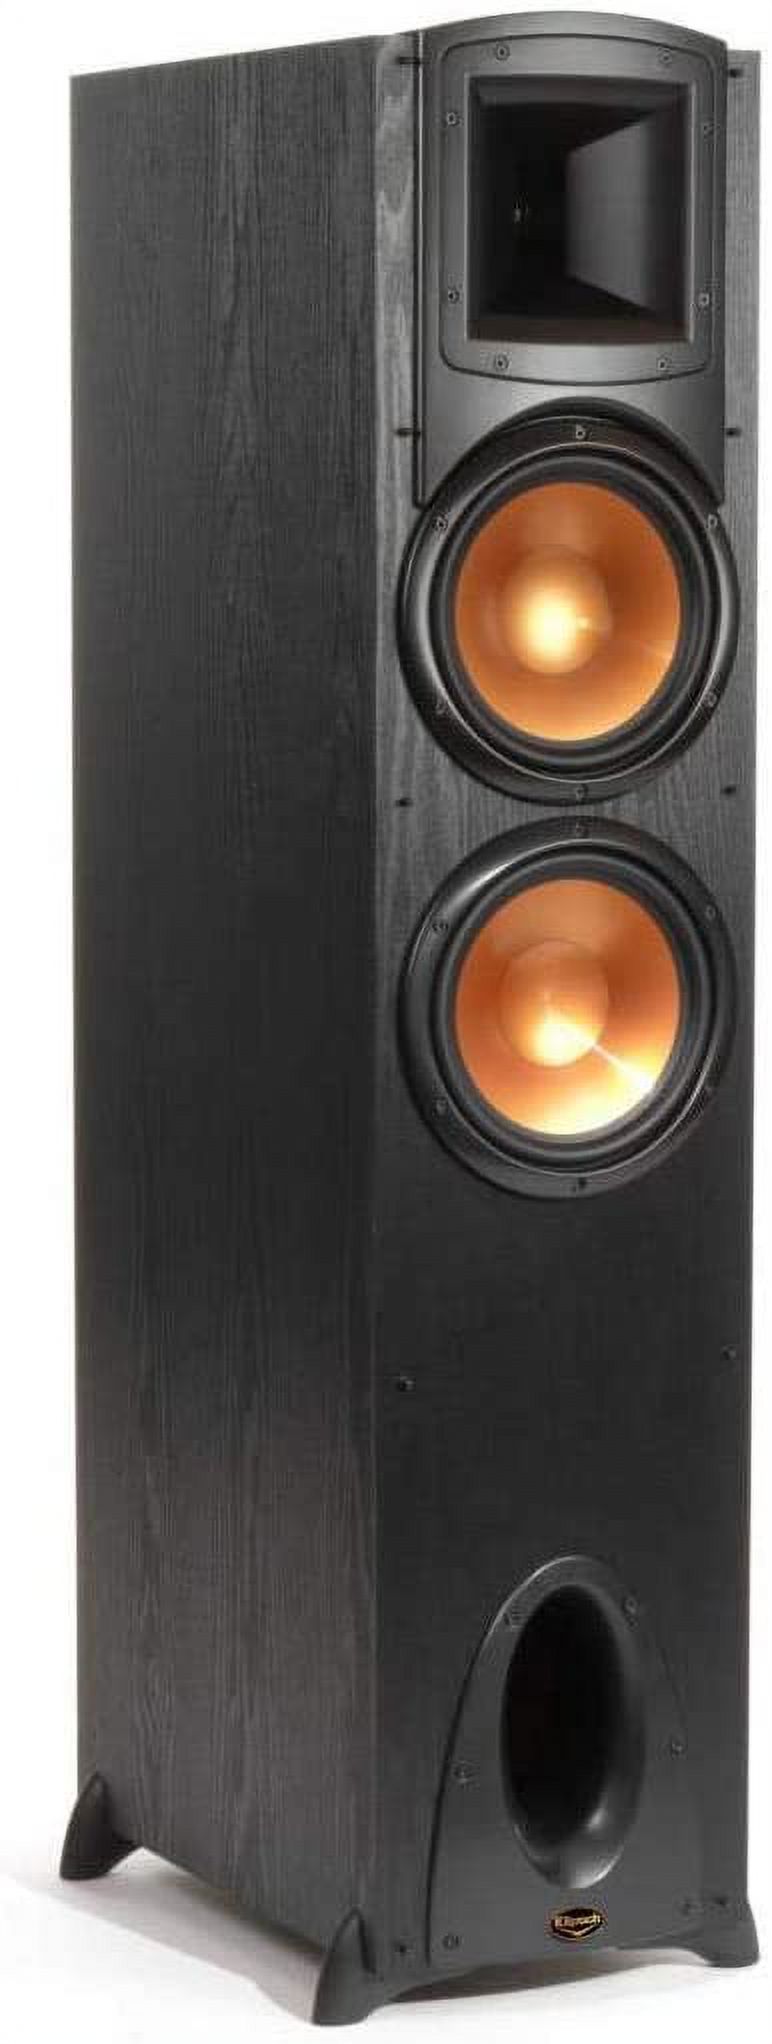 Klipsch Synergy Black Label F-300 Floorstanding Speaker with Dual 8" Woofers, Pair - image 4 of 5